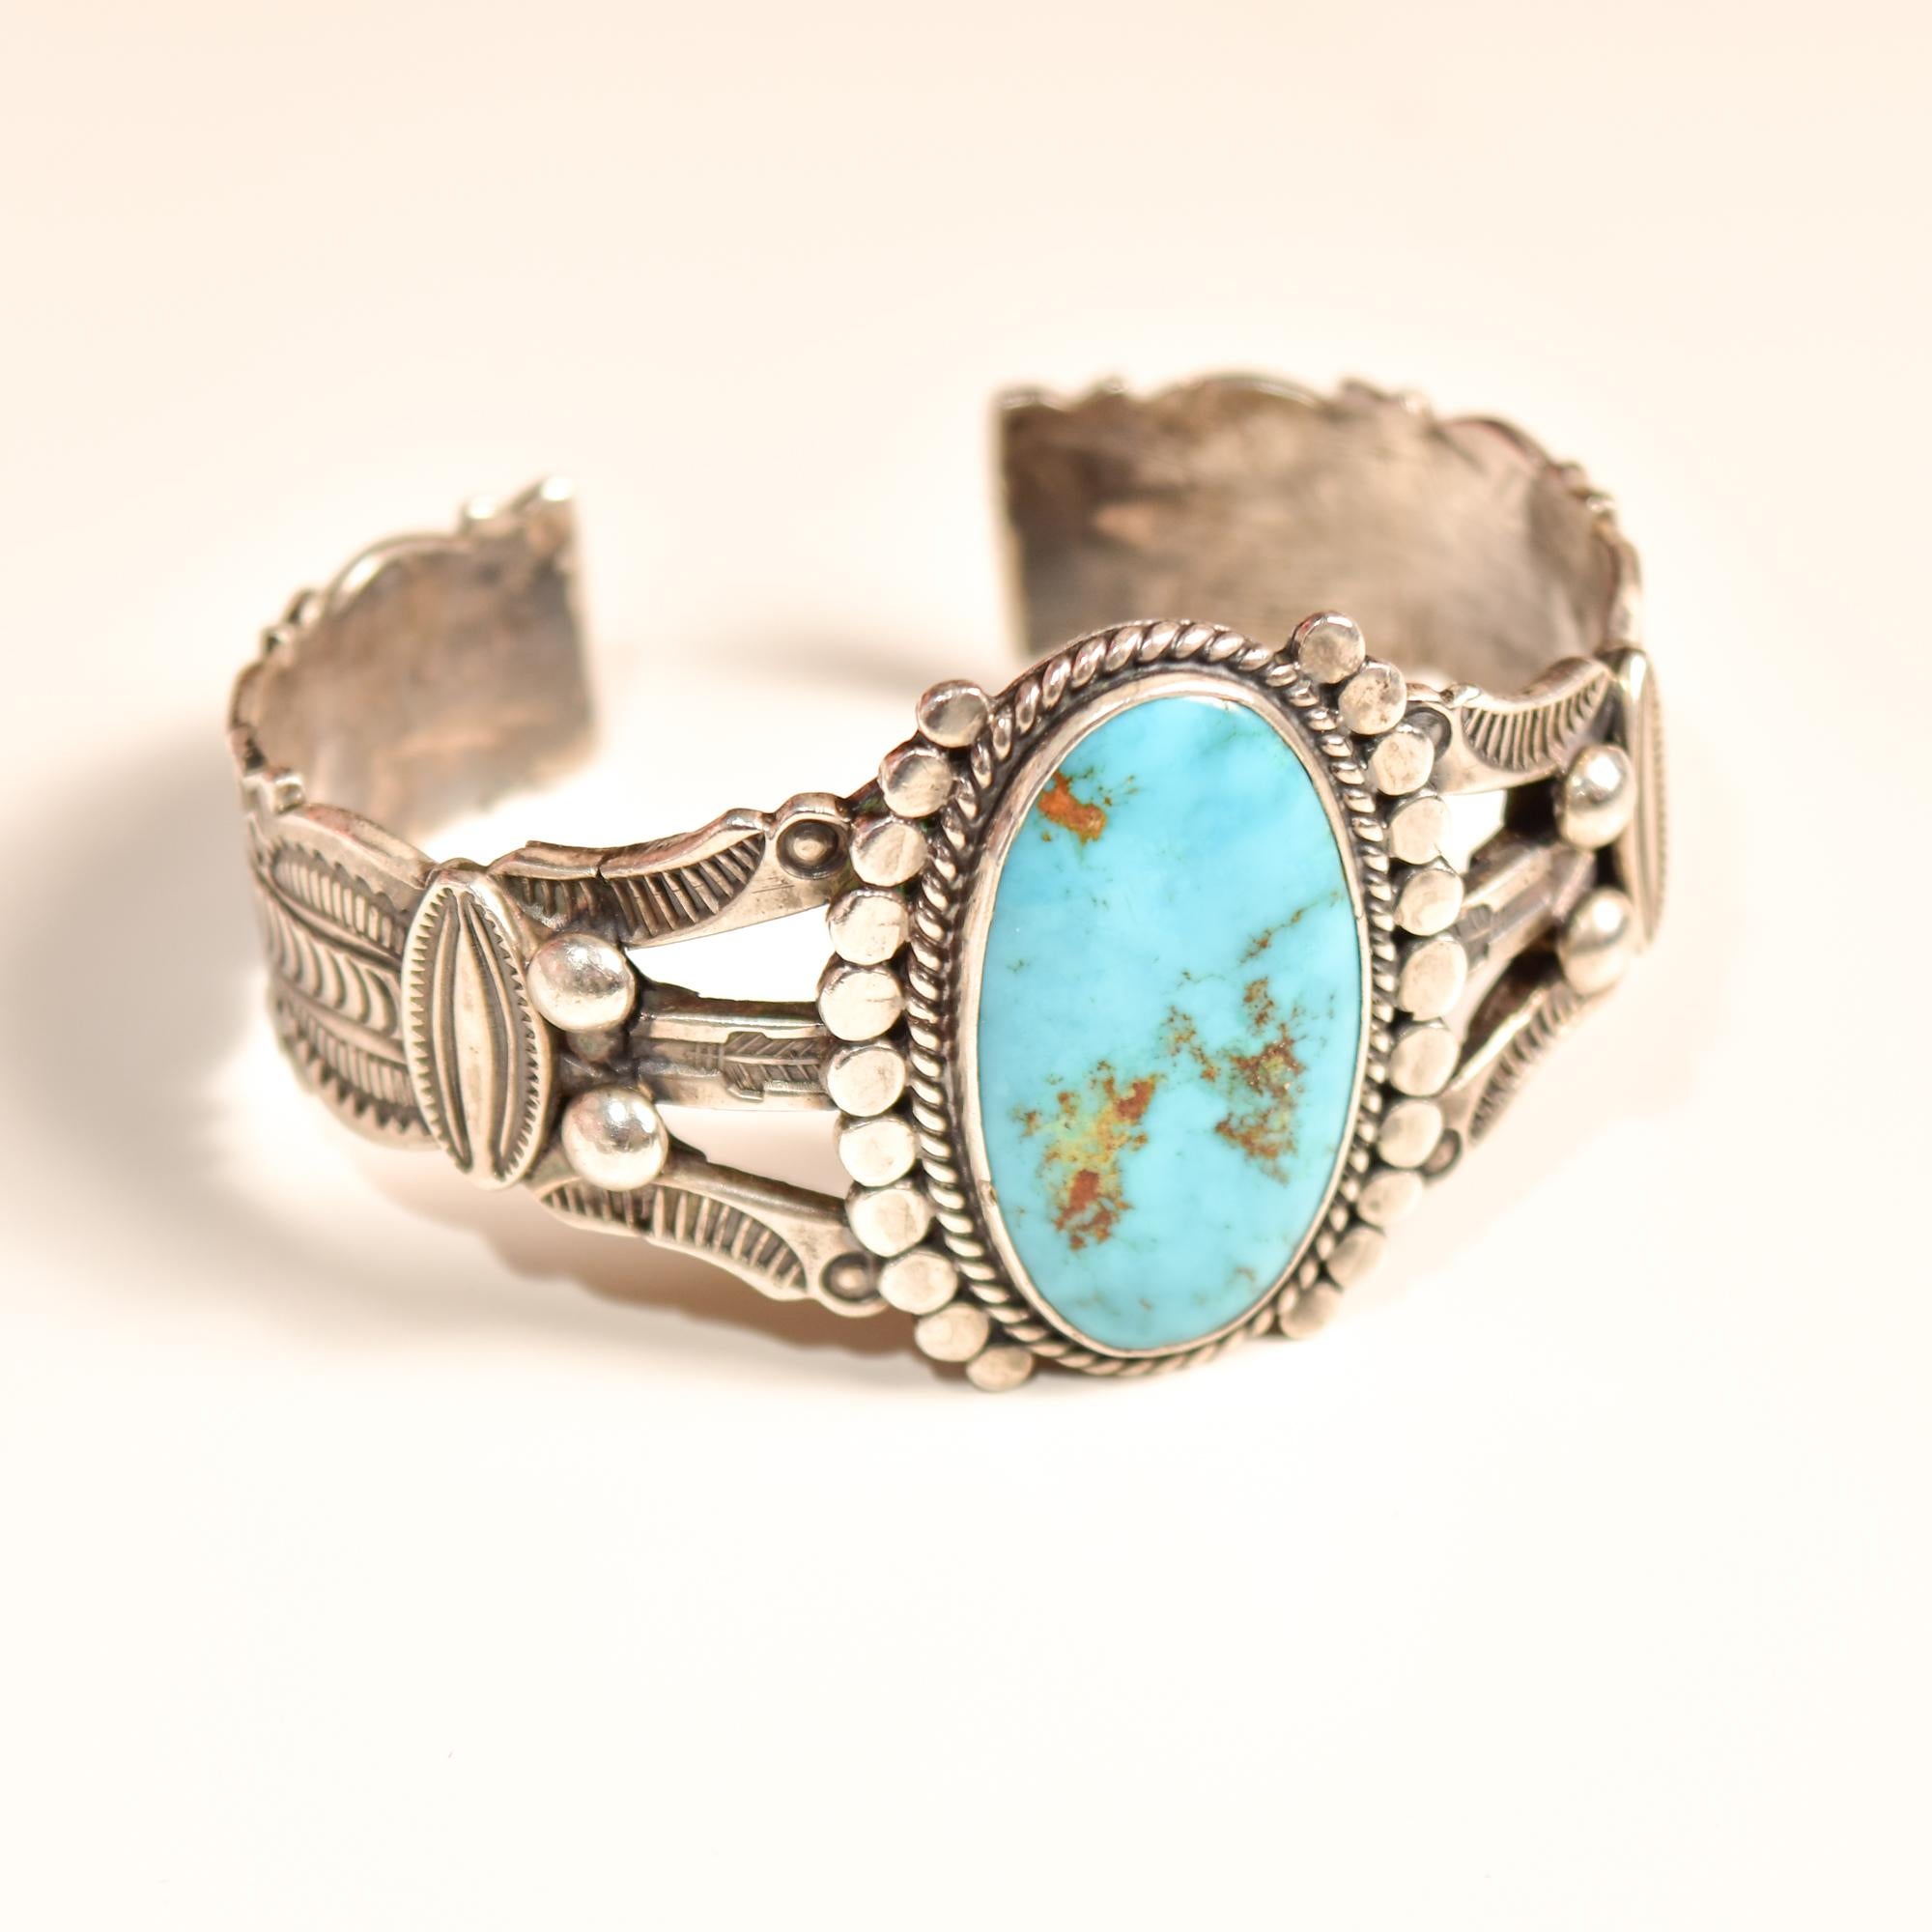 An incredible signed Morris Robinson hopi turquoise cuff. Morris Talawytewa Robinson, a master Native American gold and silversmith during the 20th century, is renowned for his beautiful hand-crafted jewelry. This bracelet is an exceptional example